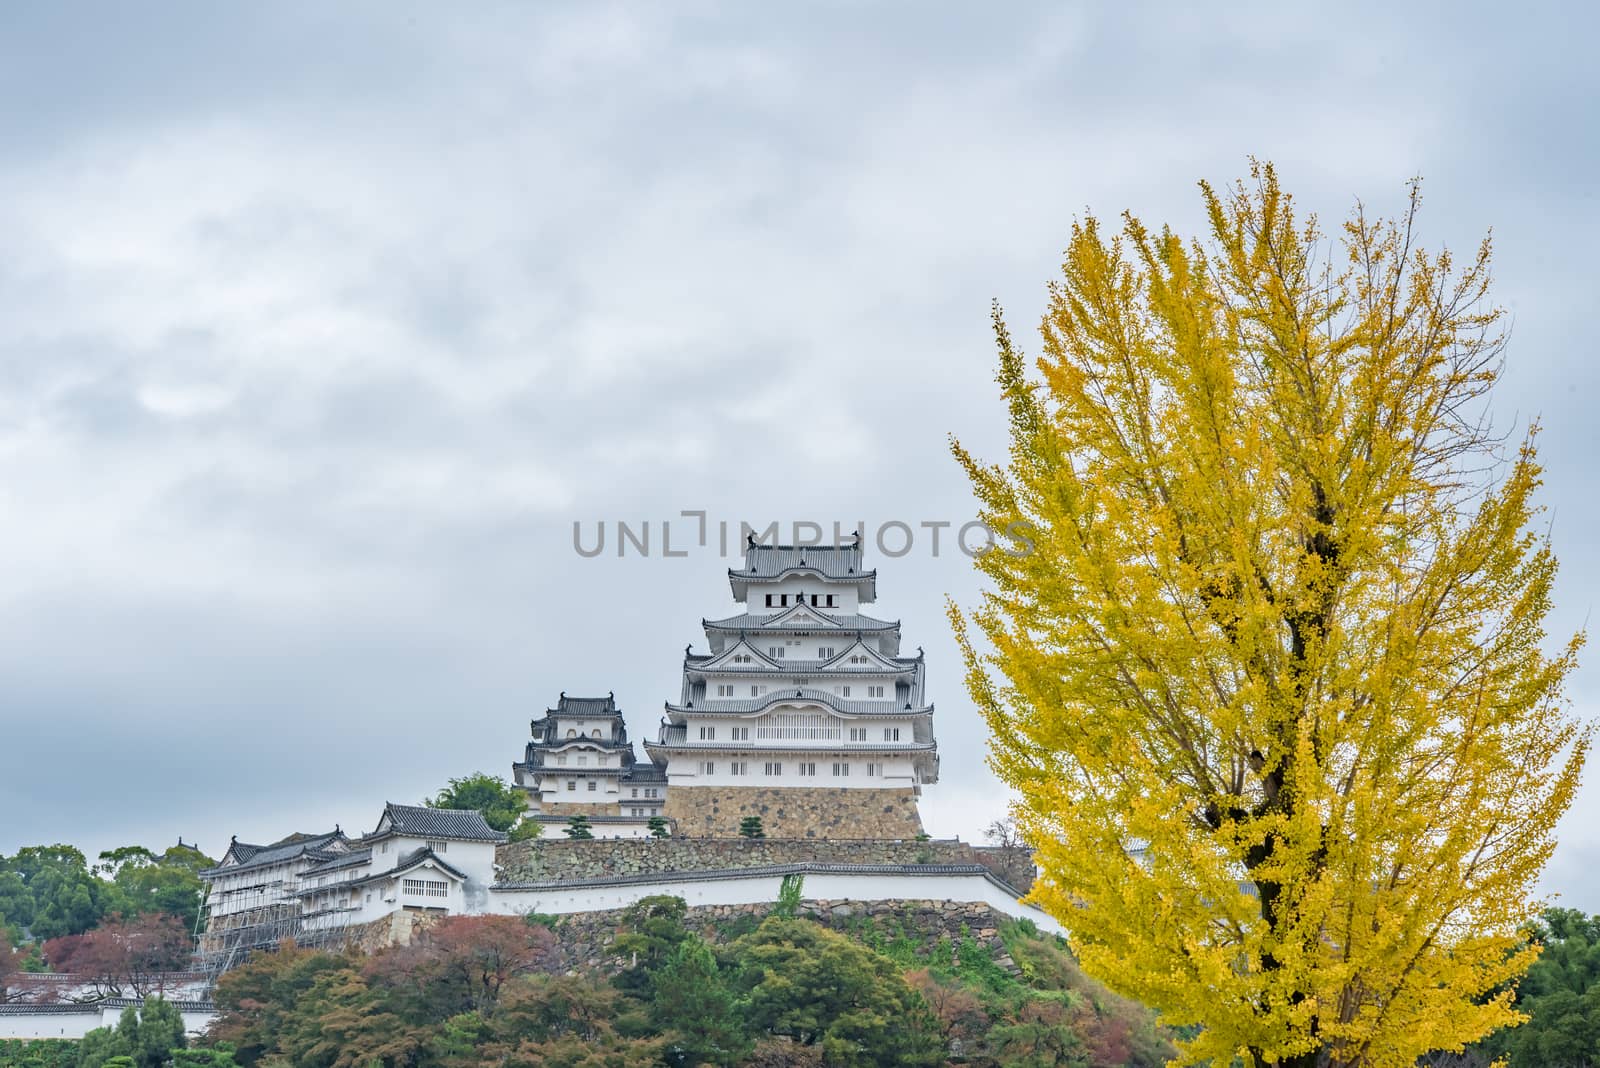 Himeji Castle in Japan, also called the white Heron castle - UNESCO world heritage site.